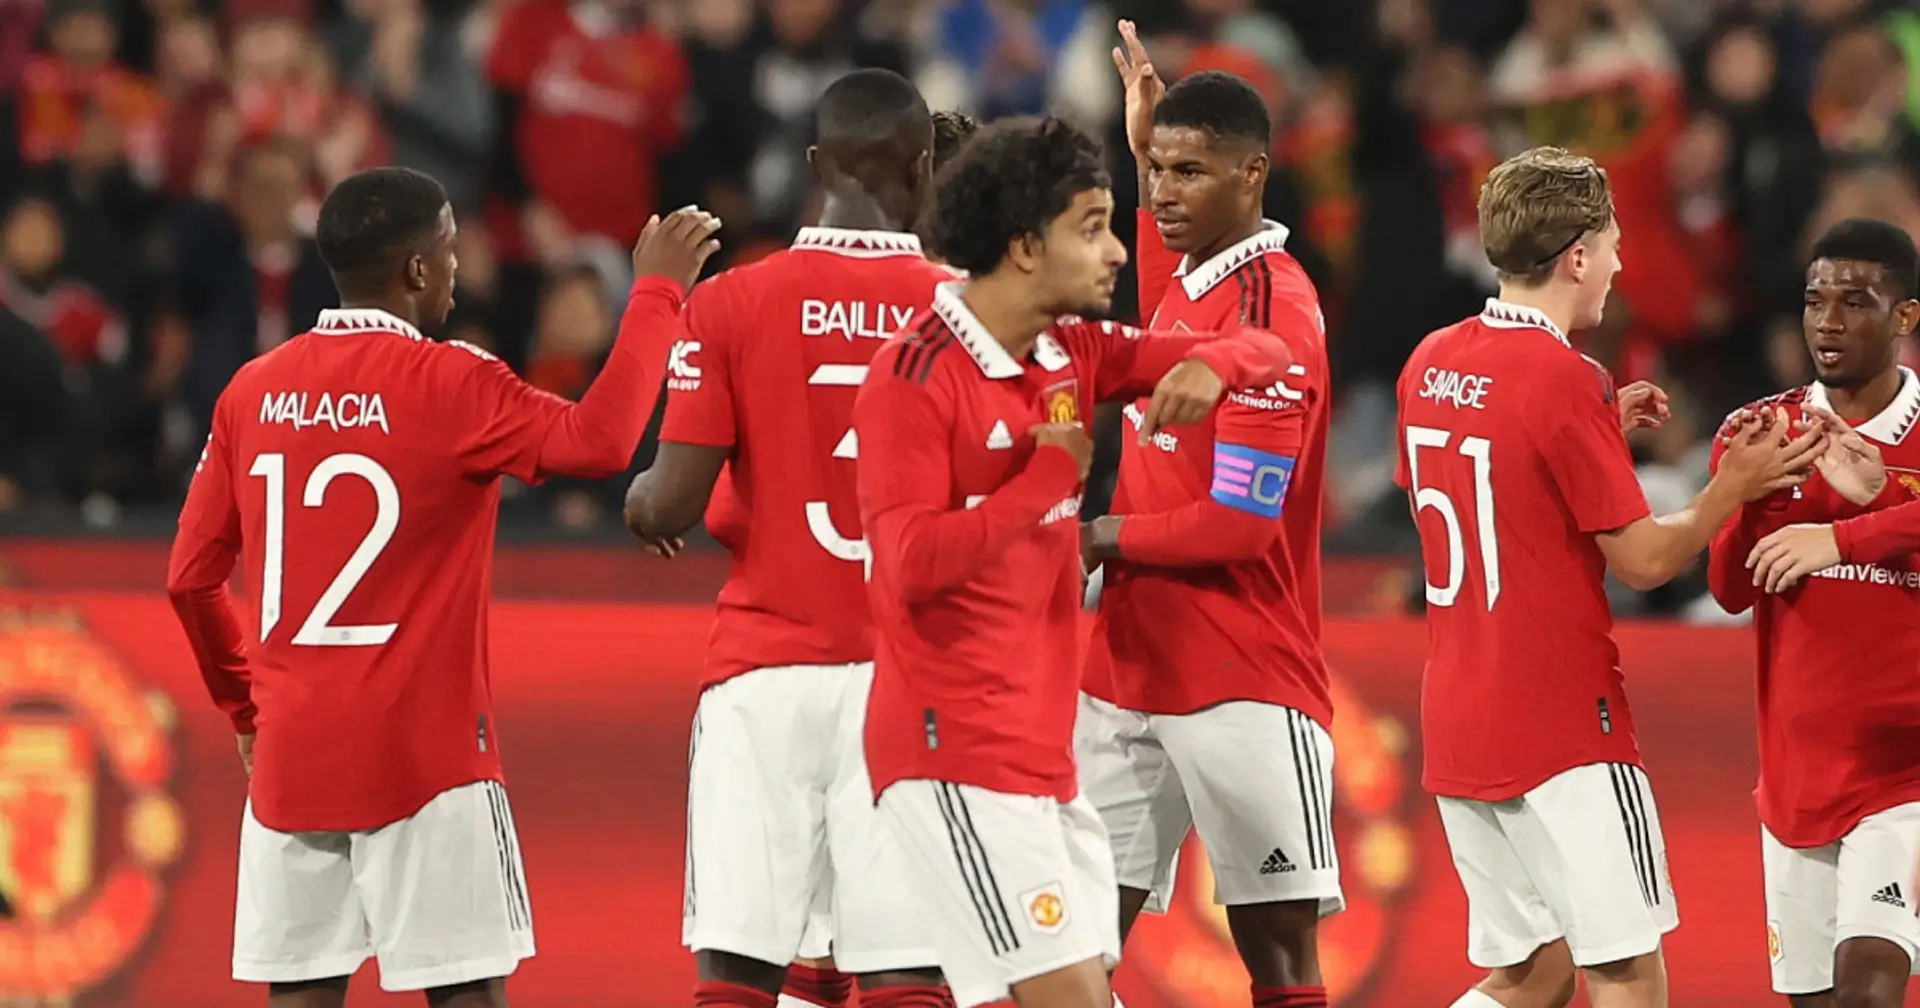 Maguire — 4, Iqbal — 7: rating Man United players in Melbourne Victory win